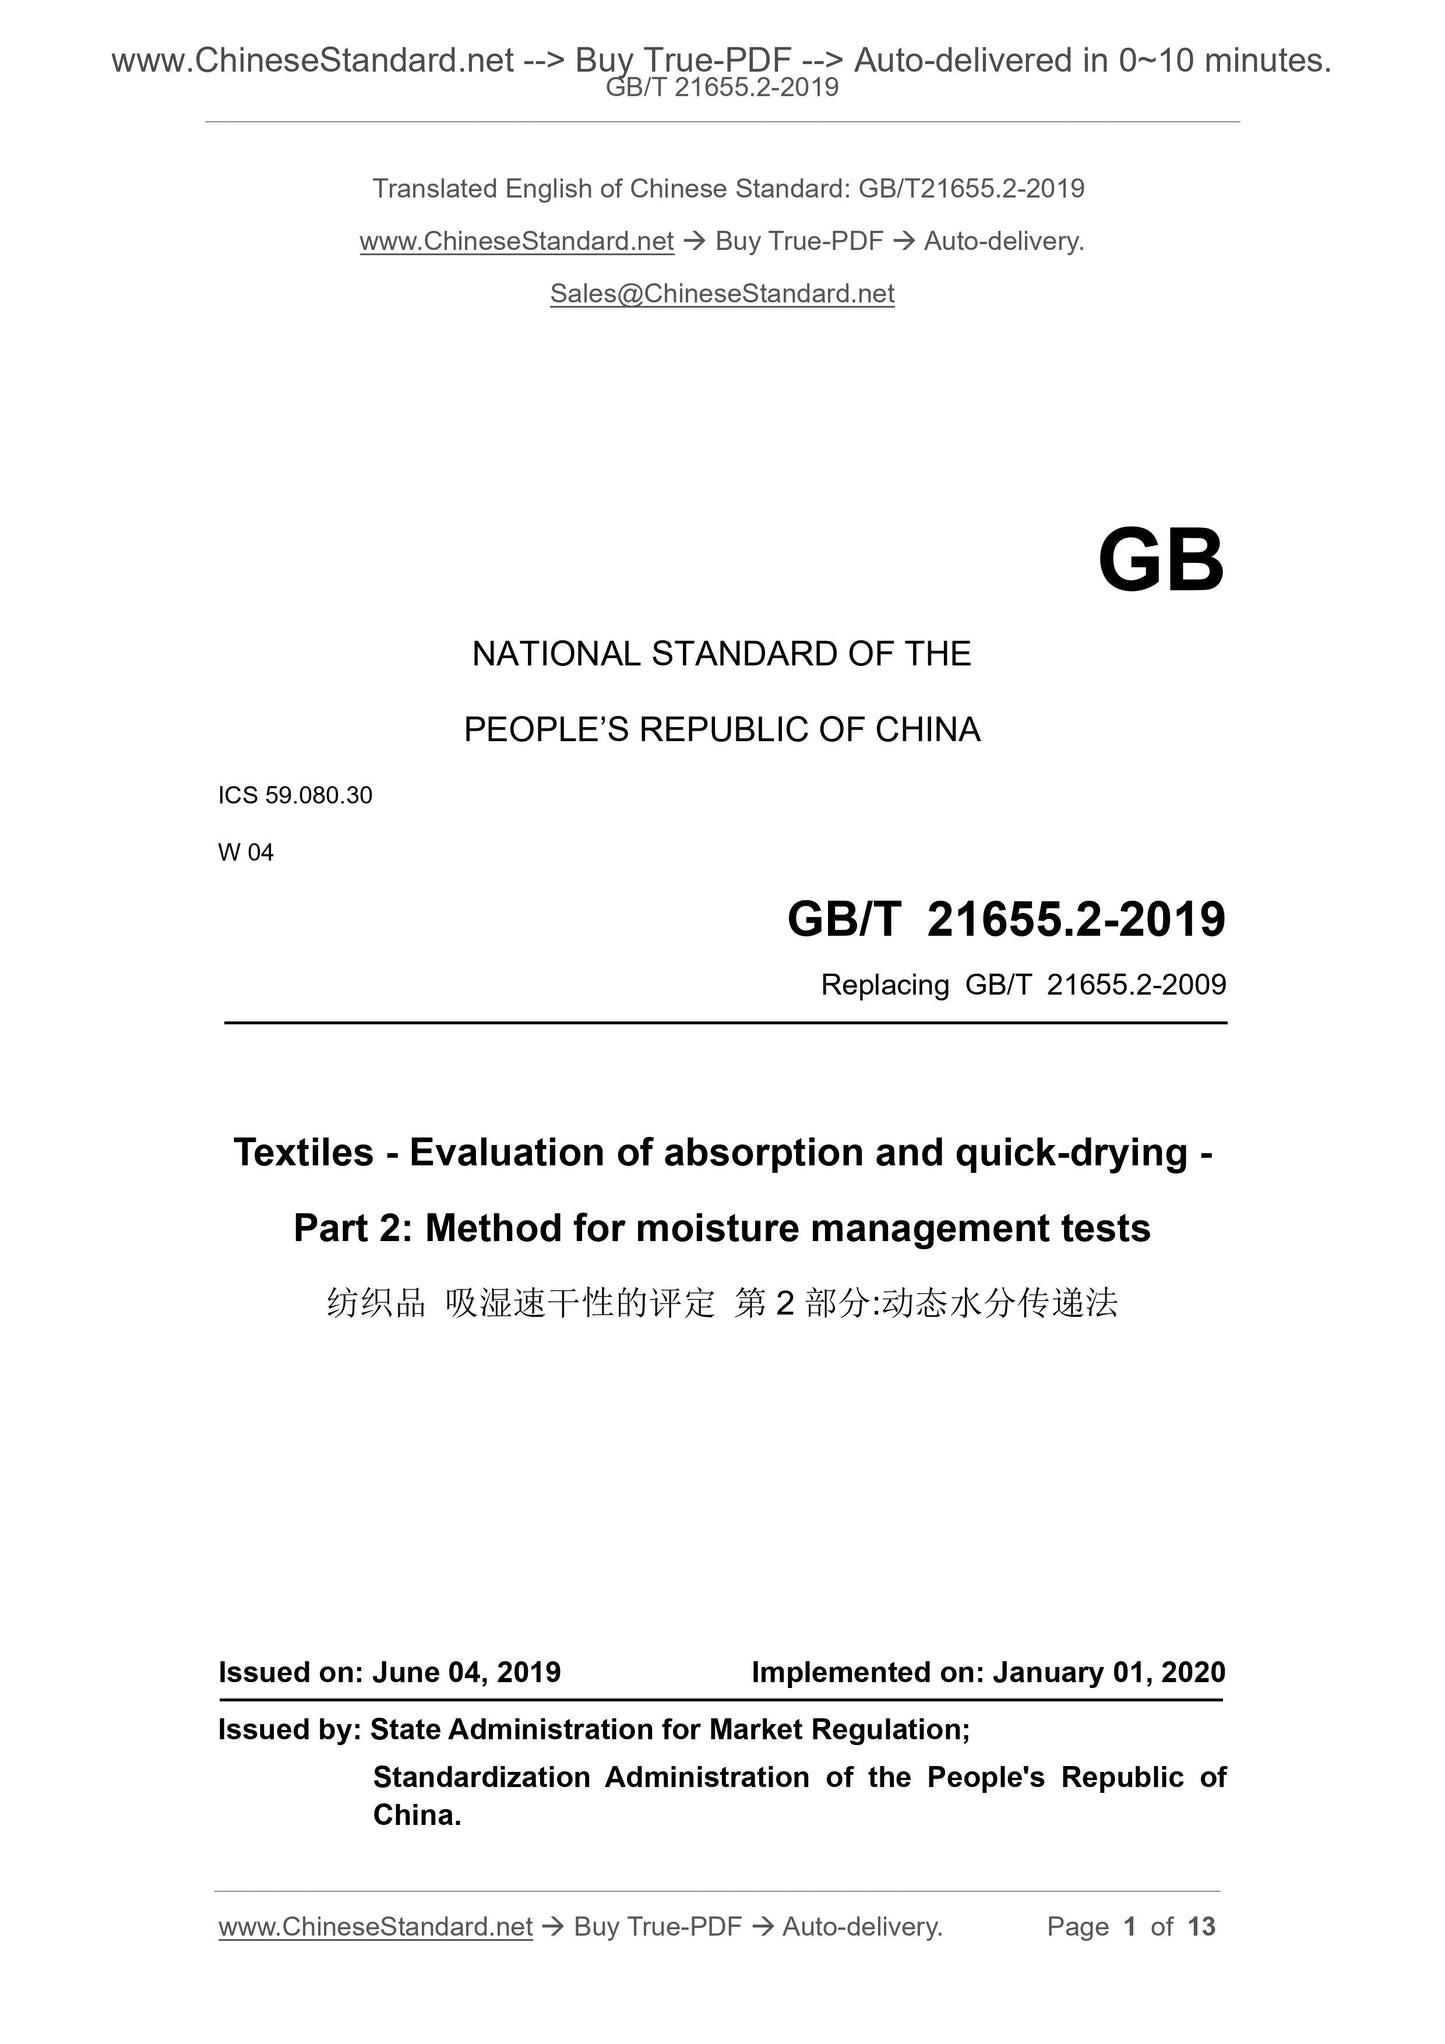 GB/T 21655.2-2019 Page 1